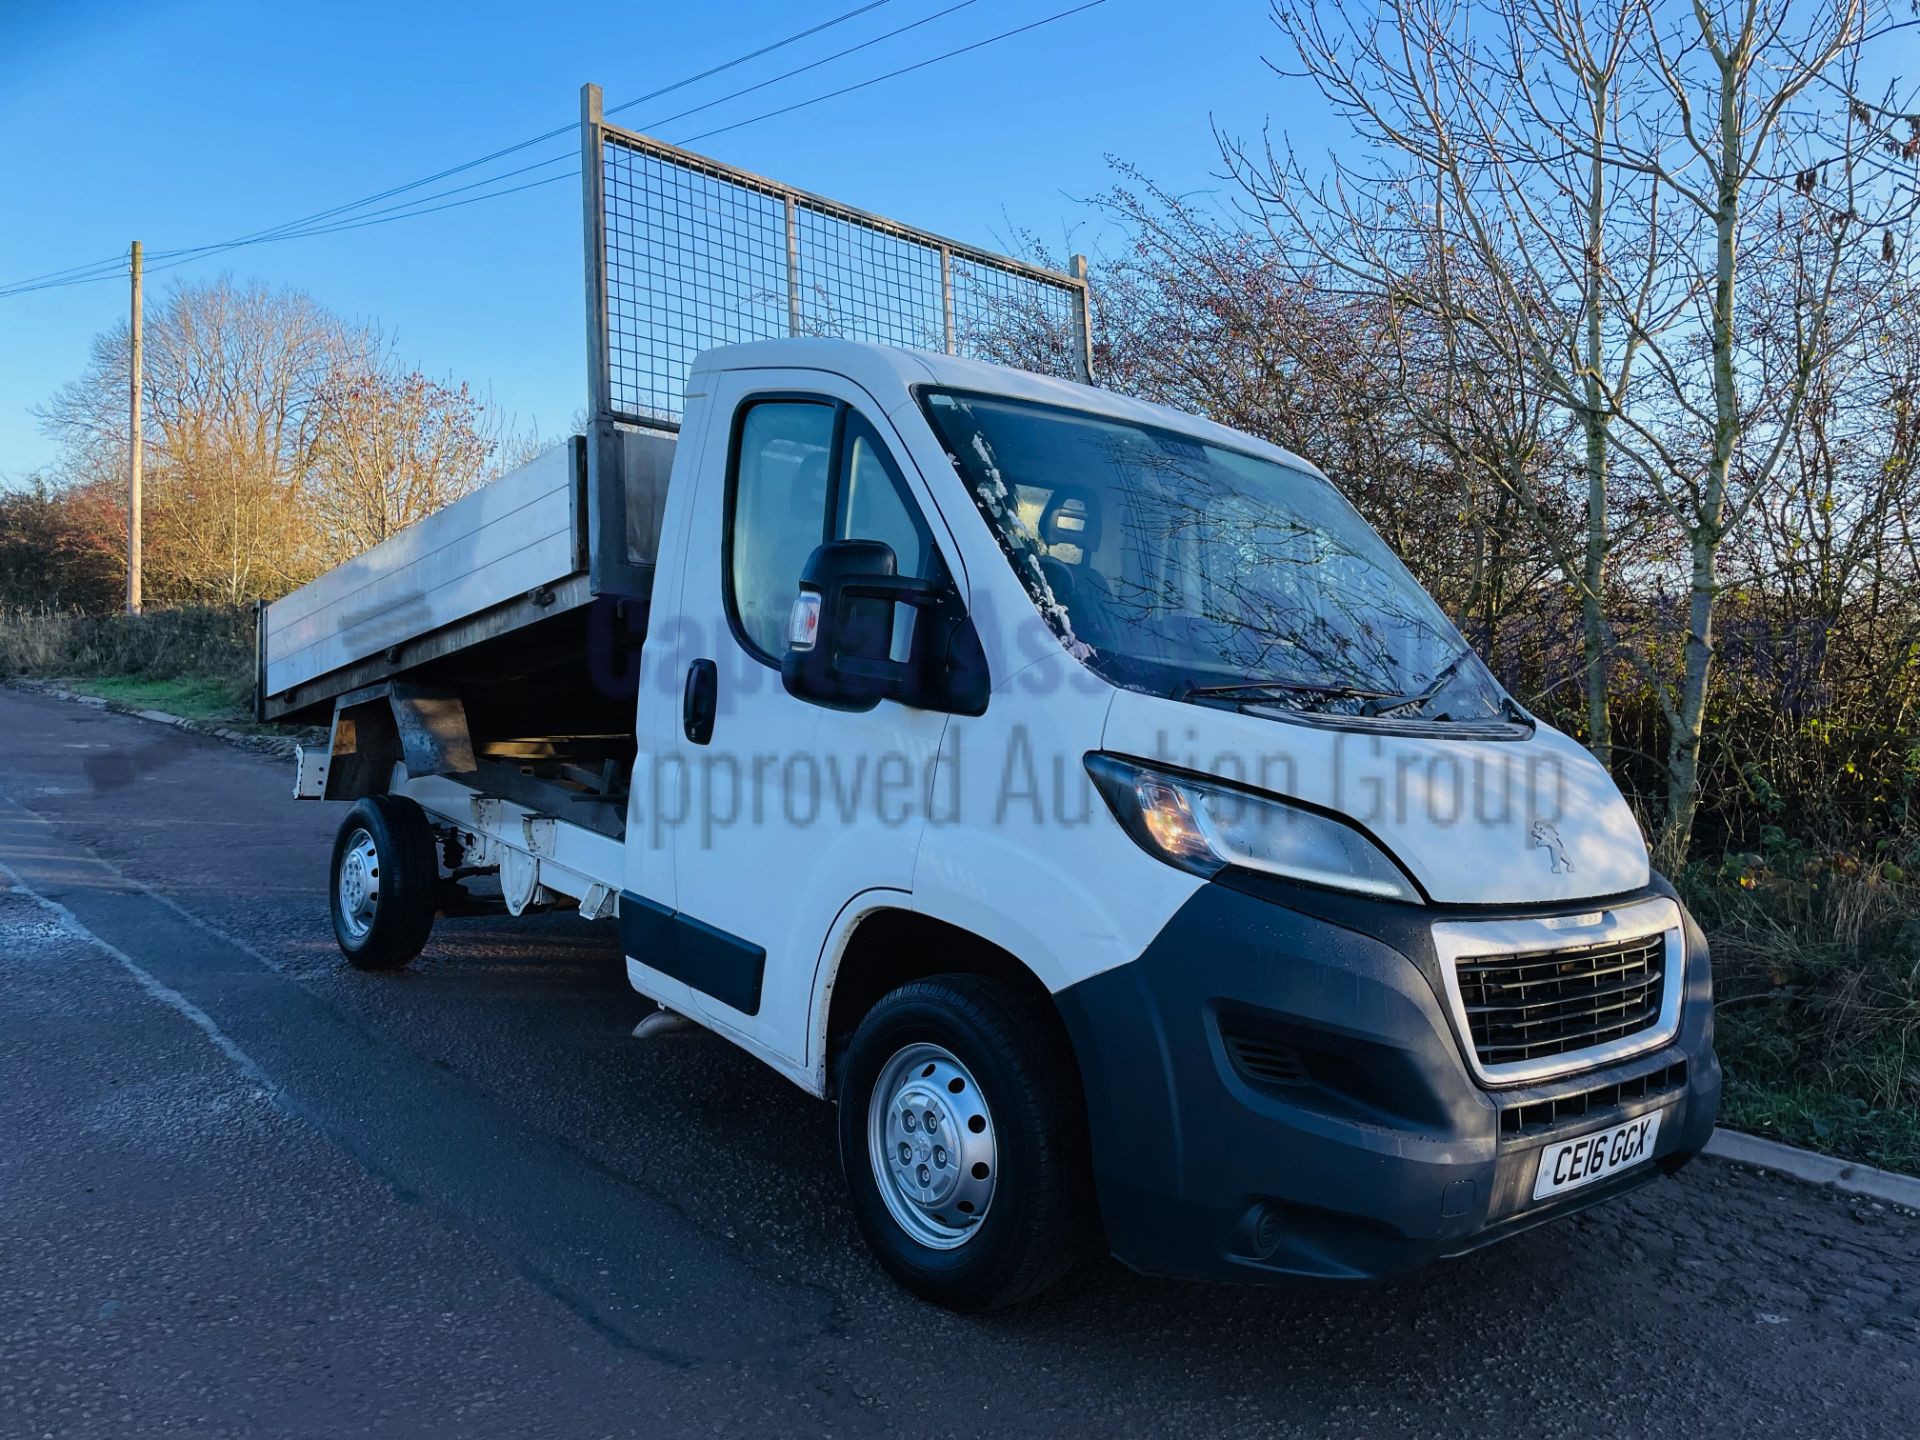 (On Sale) PEUGEOT BOXER 335 *TIPPER TRUCK* (2016) '2.2 HDI - 130 BHP - 6 SPEED' (1 OWNER) *3500 KG* - Image 4 of 38